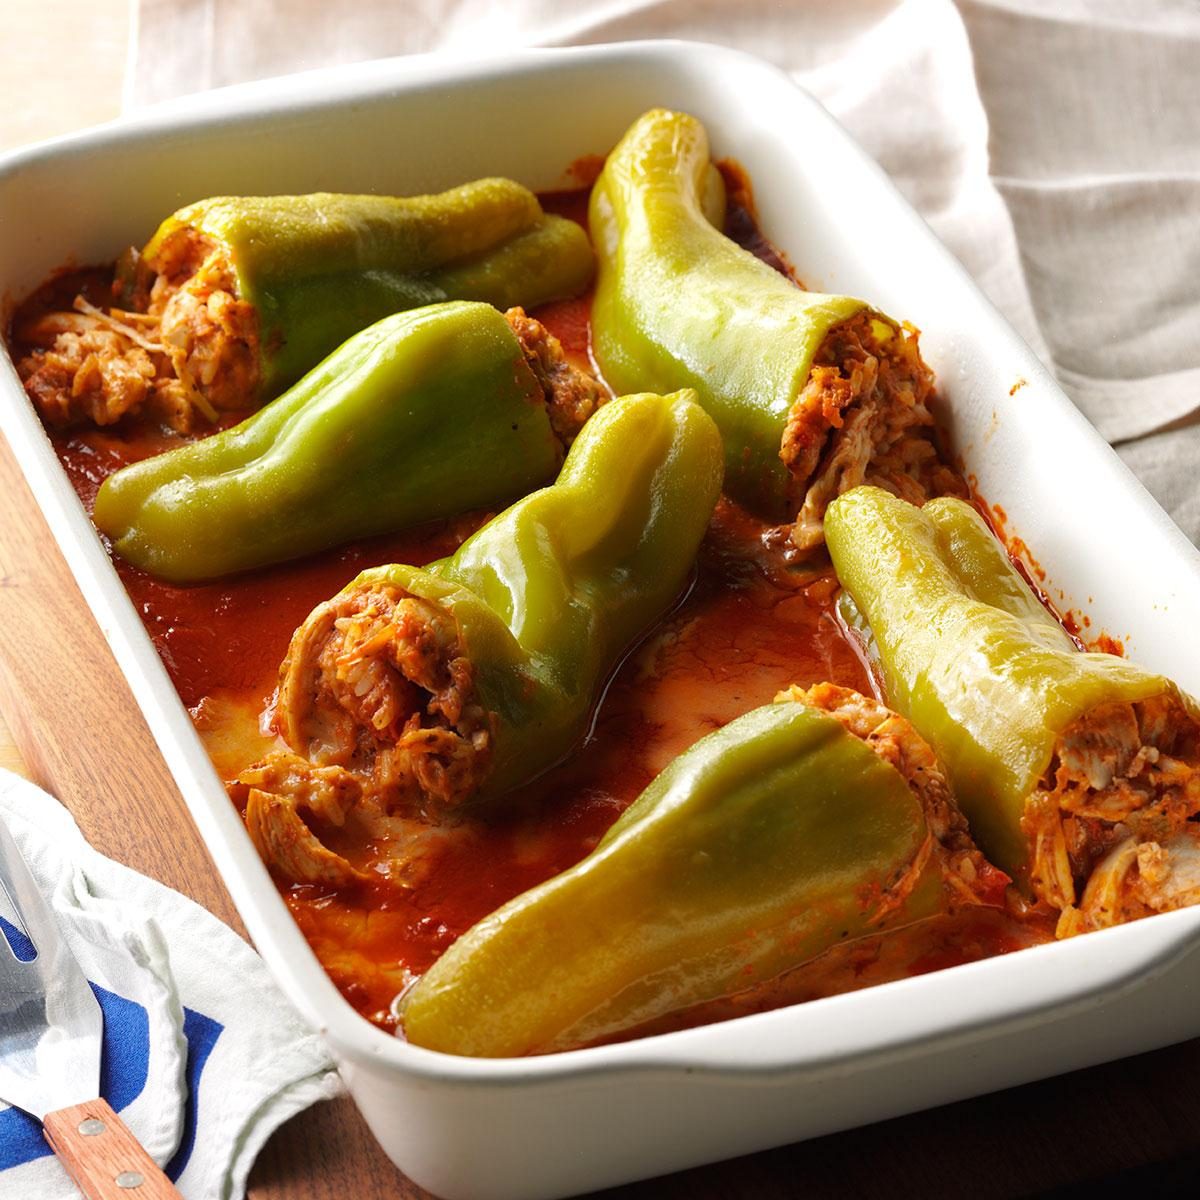 <p>Here's a different take on traditional stuffed peppers. I substituted chicken for the beef and used Cubanelle peppers in place of the green peppers that are usually featured in such a dish. —Ron Burlingame, Canton, Ohio</p> <div class="listicle-page__buttons"> <div class="listicle-page__cta-button"><a href='https://www.tasteofhome.com/recipes/chicken-stuffed-cubanelle-peppers/'>Go to Recipe</a></div> </div>